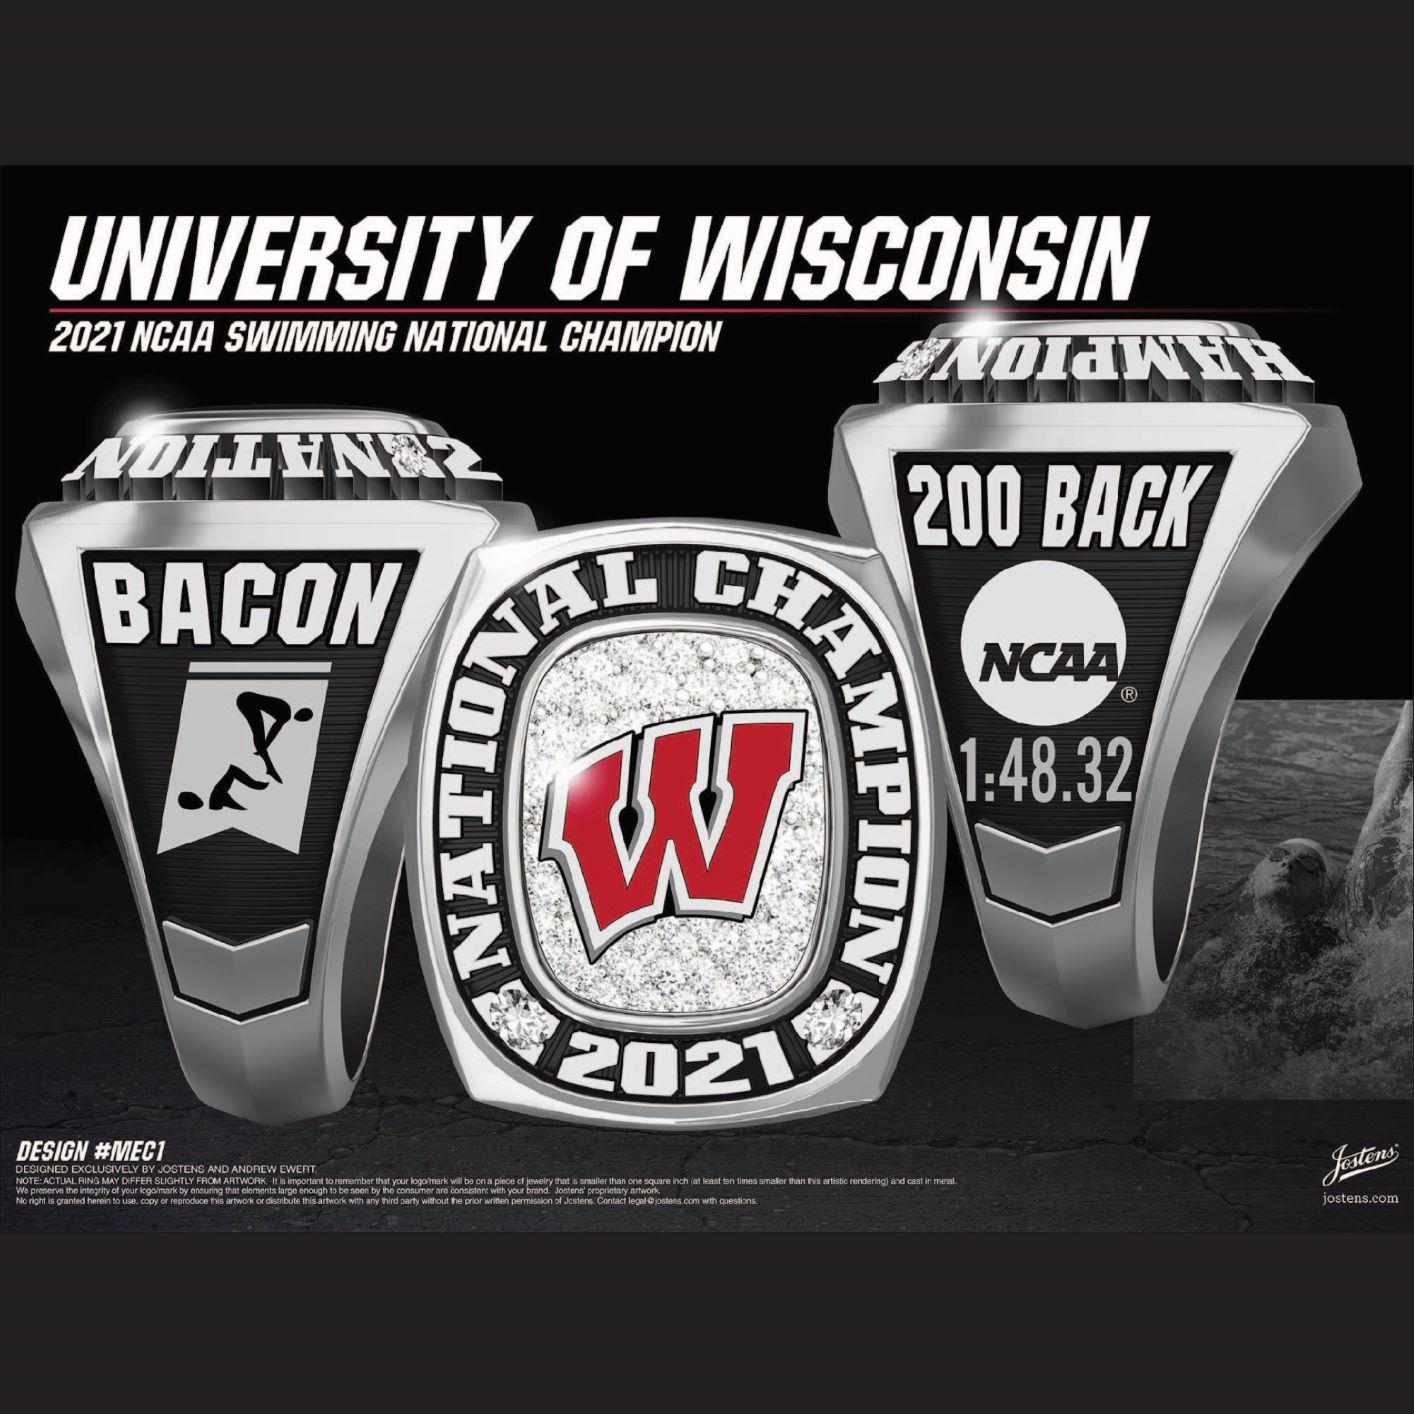 University of Wisconsin Women's Swimming & Diving 2021 National Championship Ring